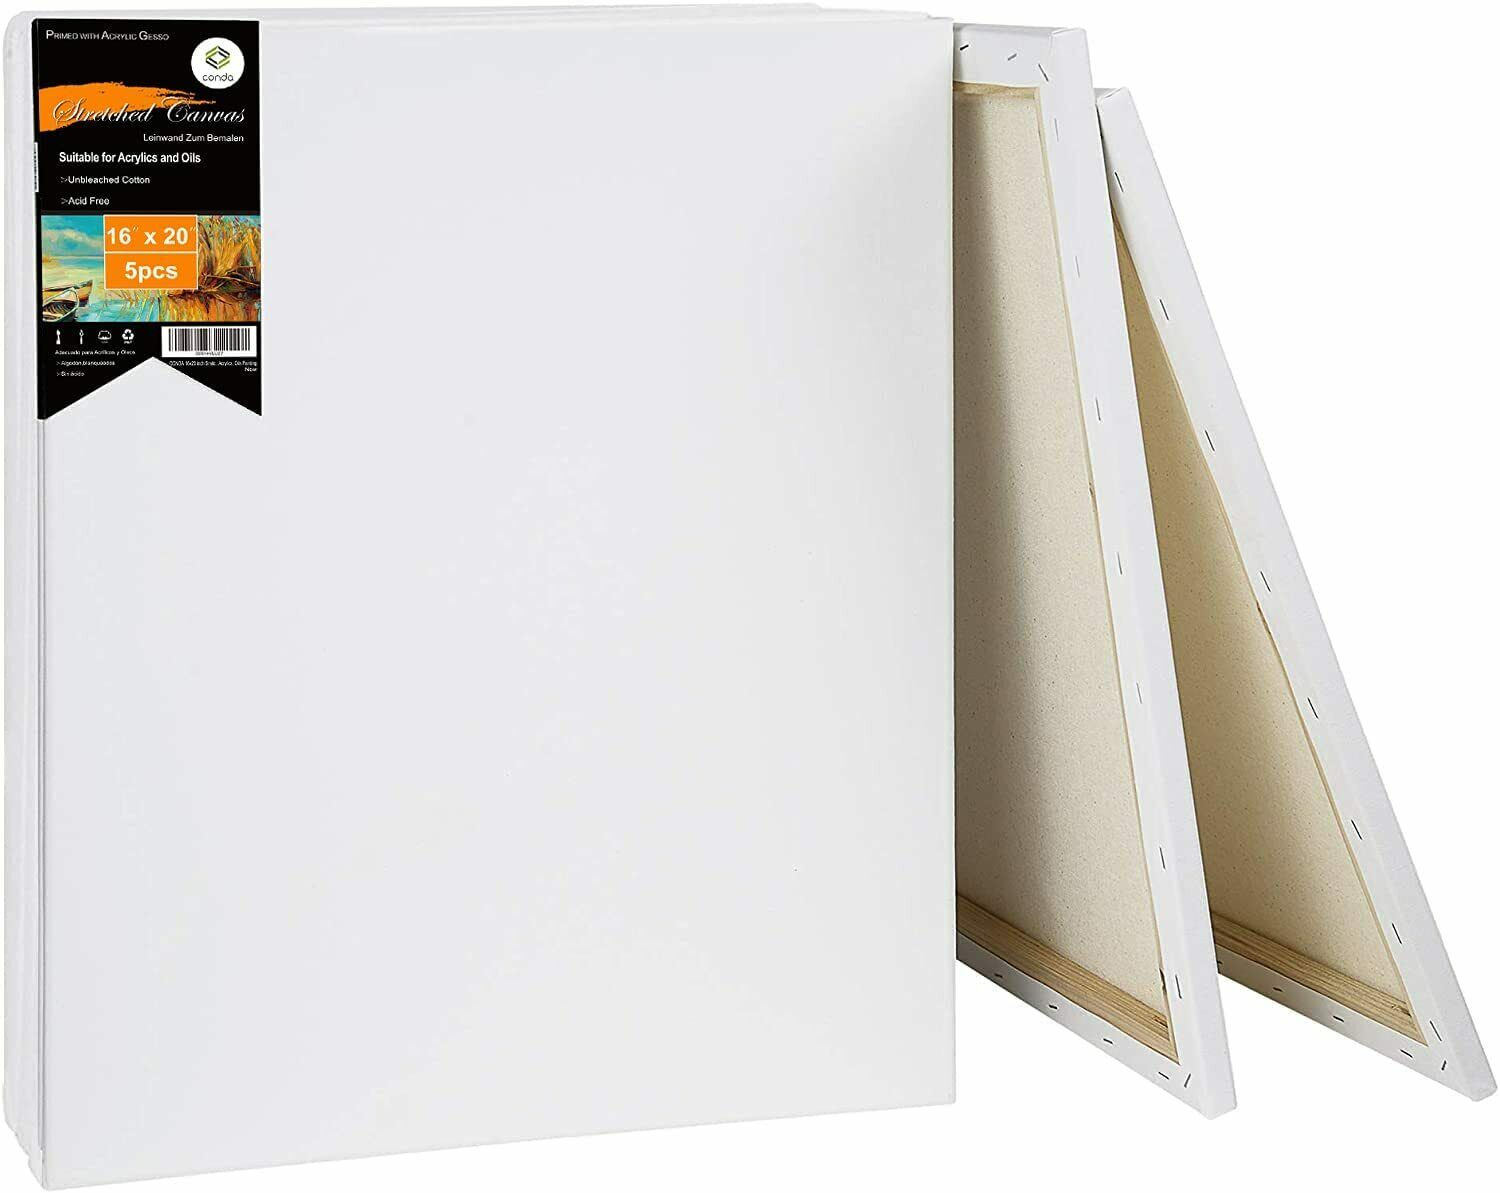 Painting Canvas Board Blank 16x20 Inch Stretched Artist Acrylic Primed Set Of 5